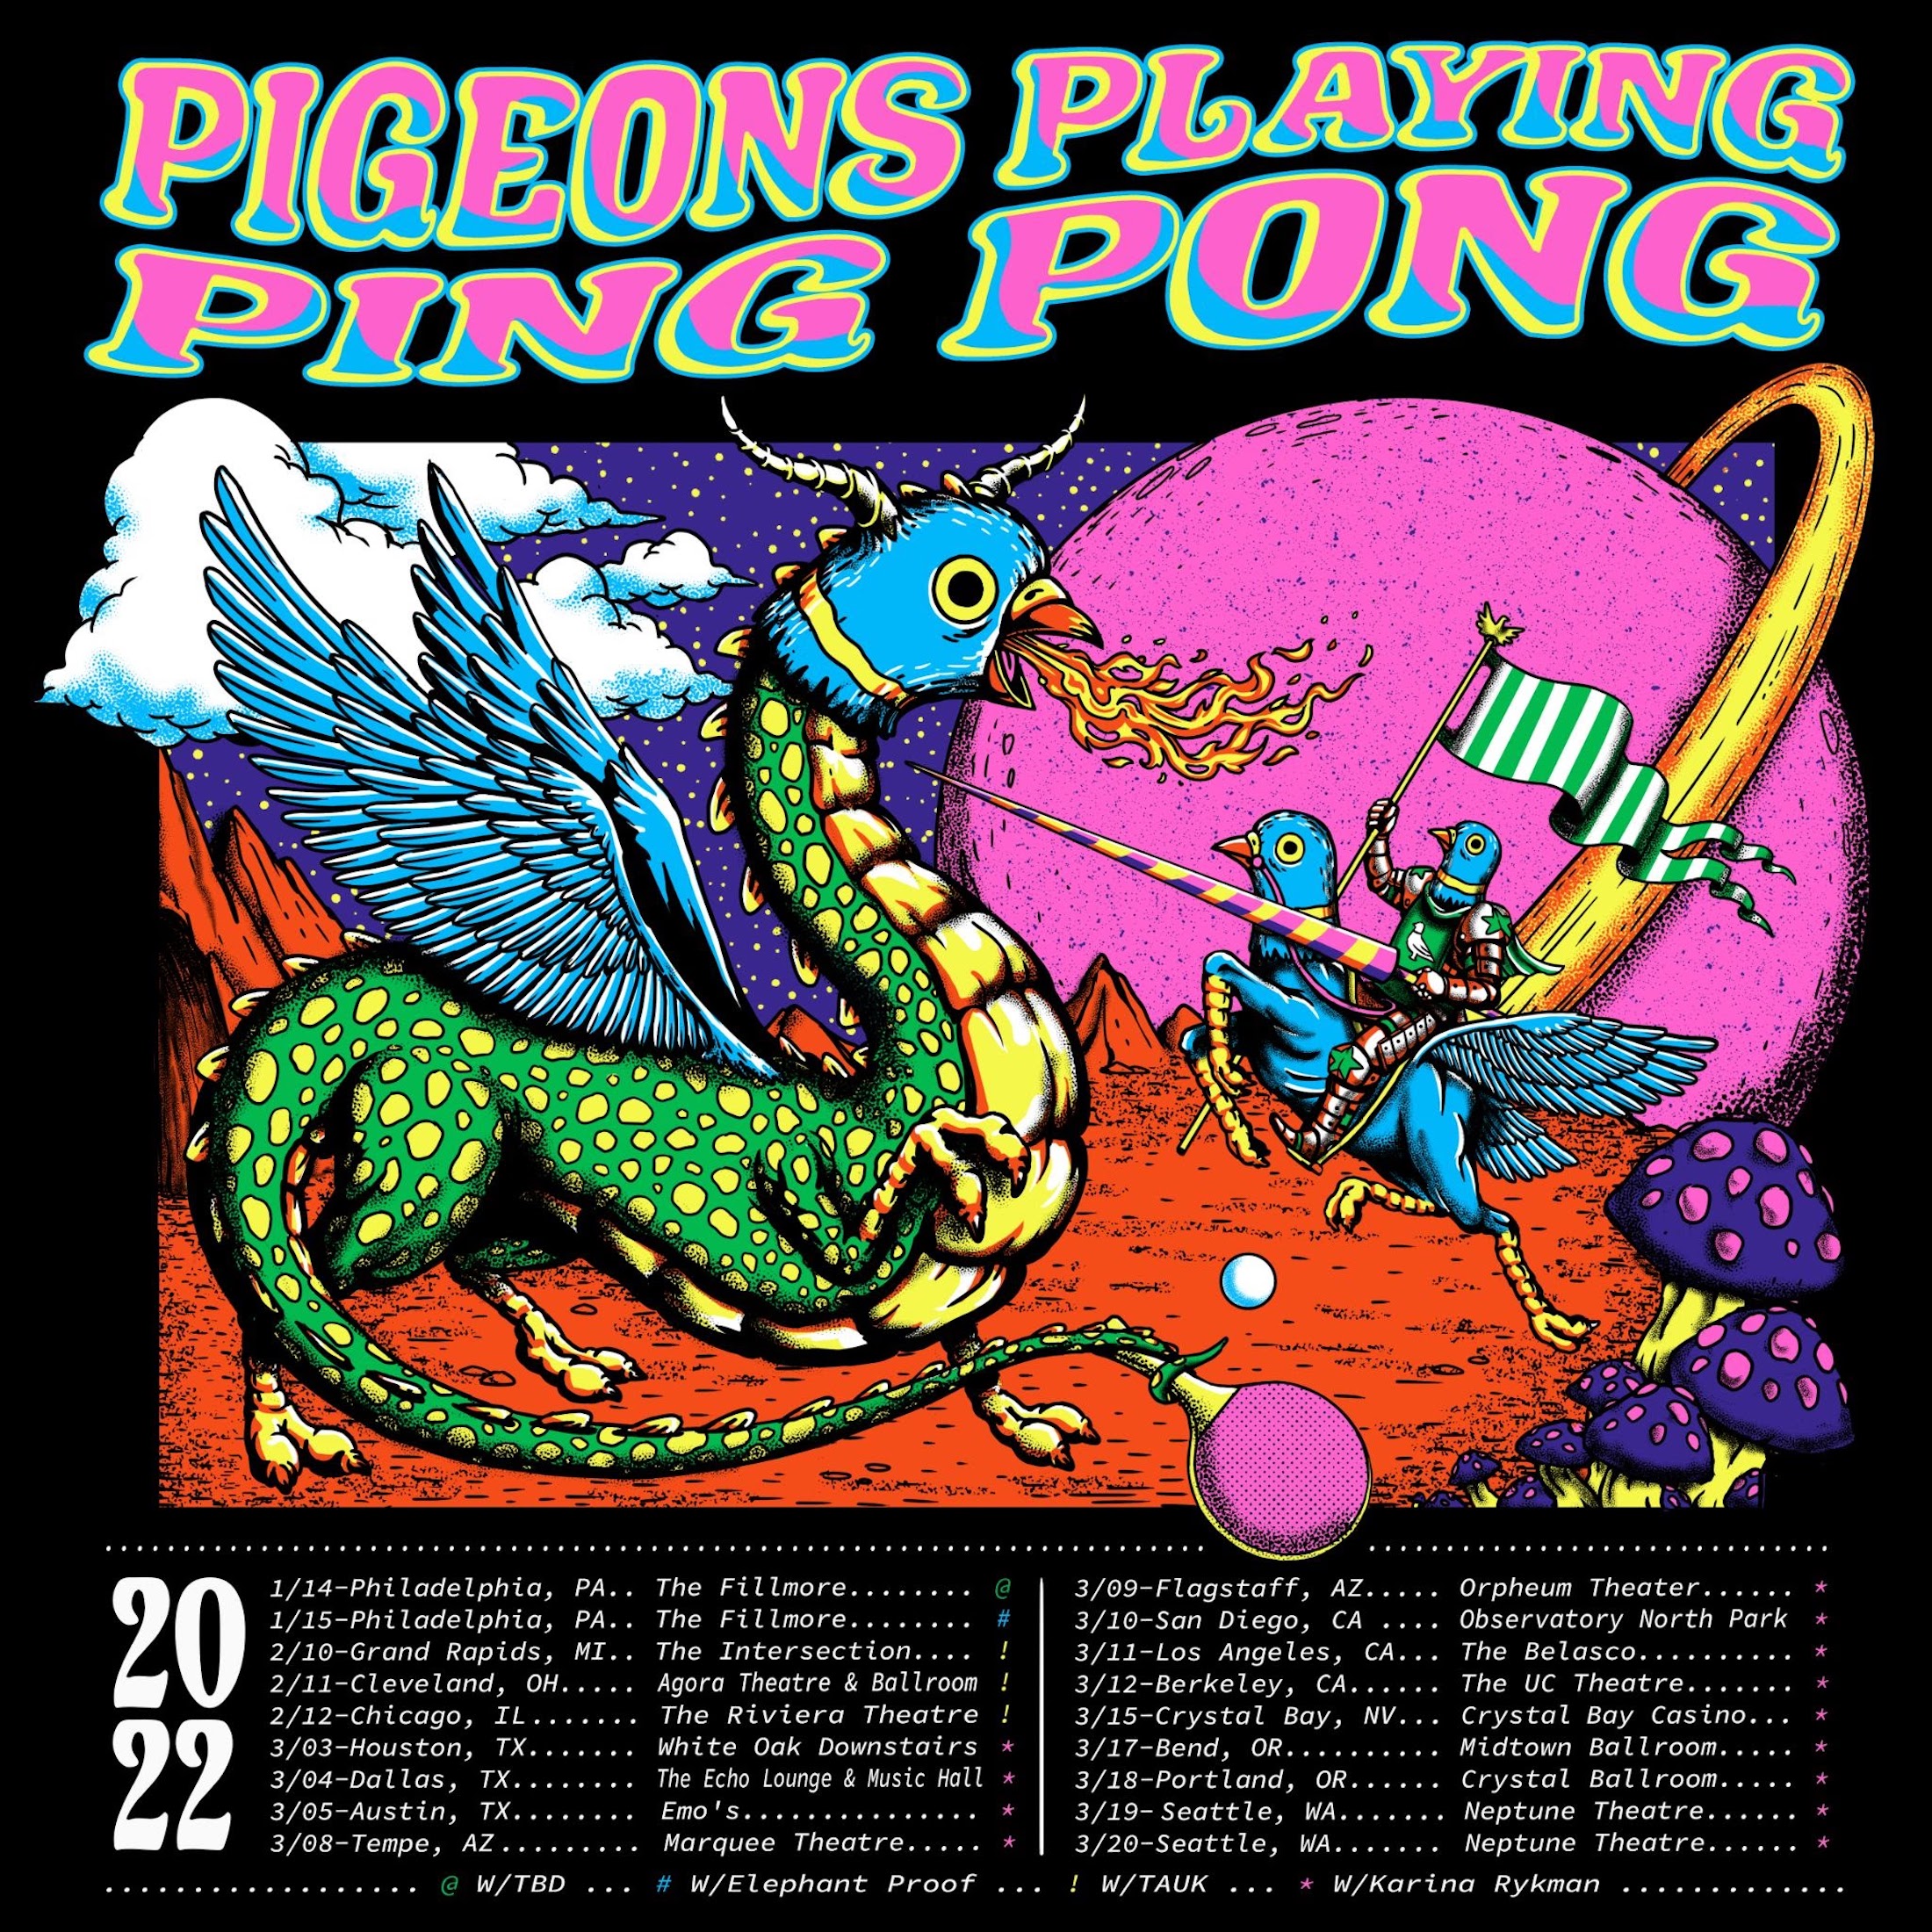 Pigeons Playing Ping Pong Announces Winter 2022 Tour Dates 